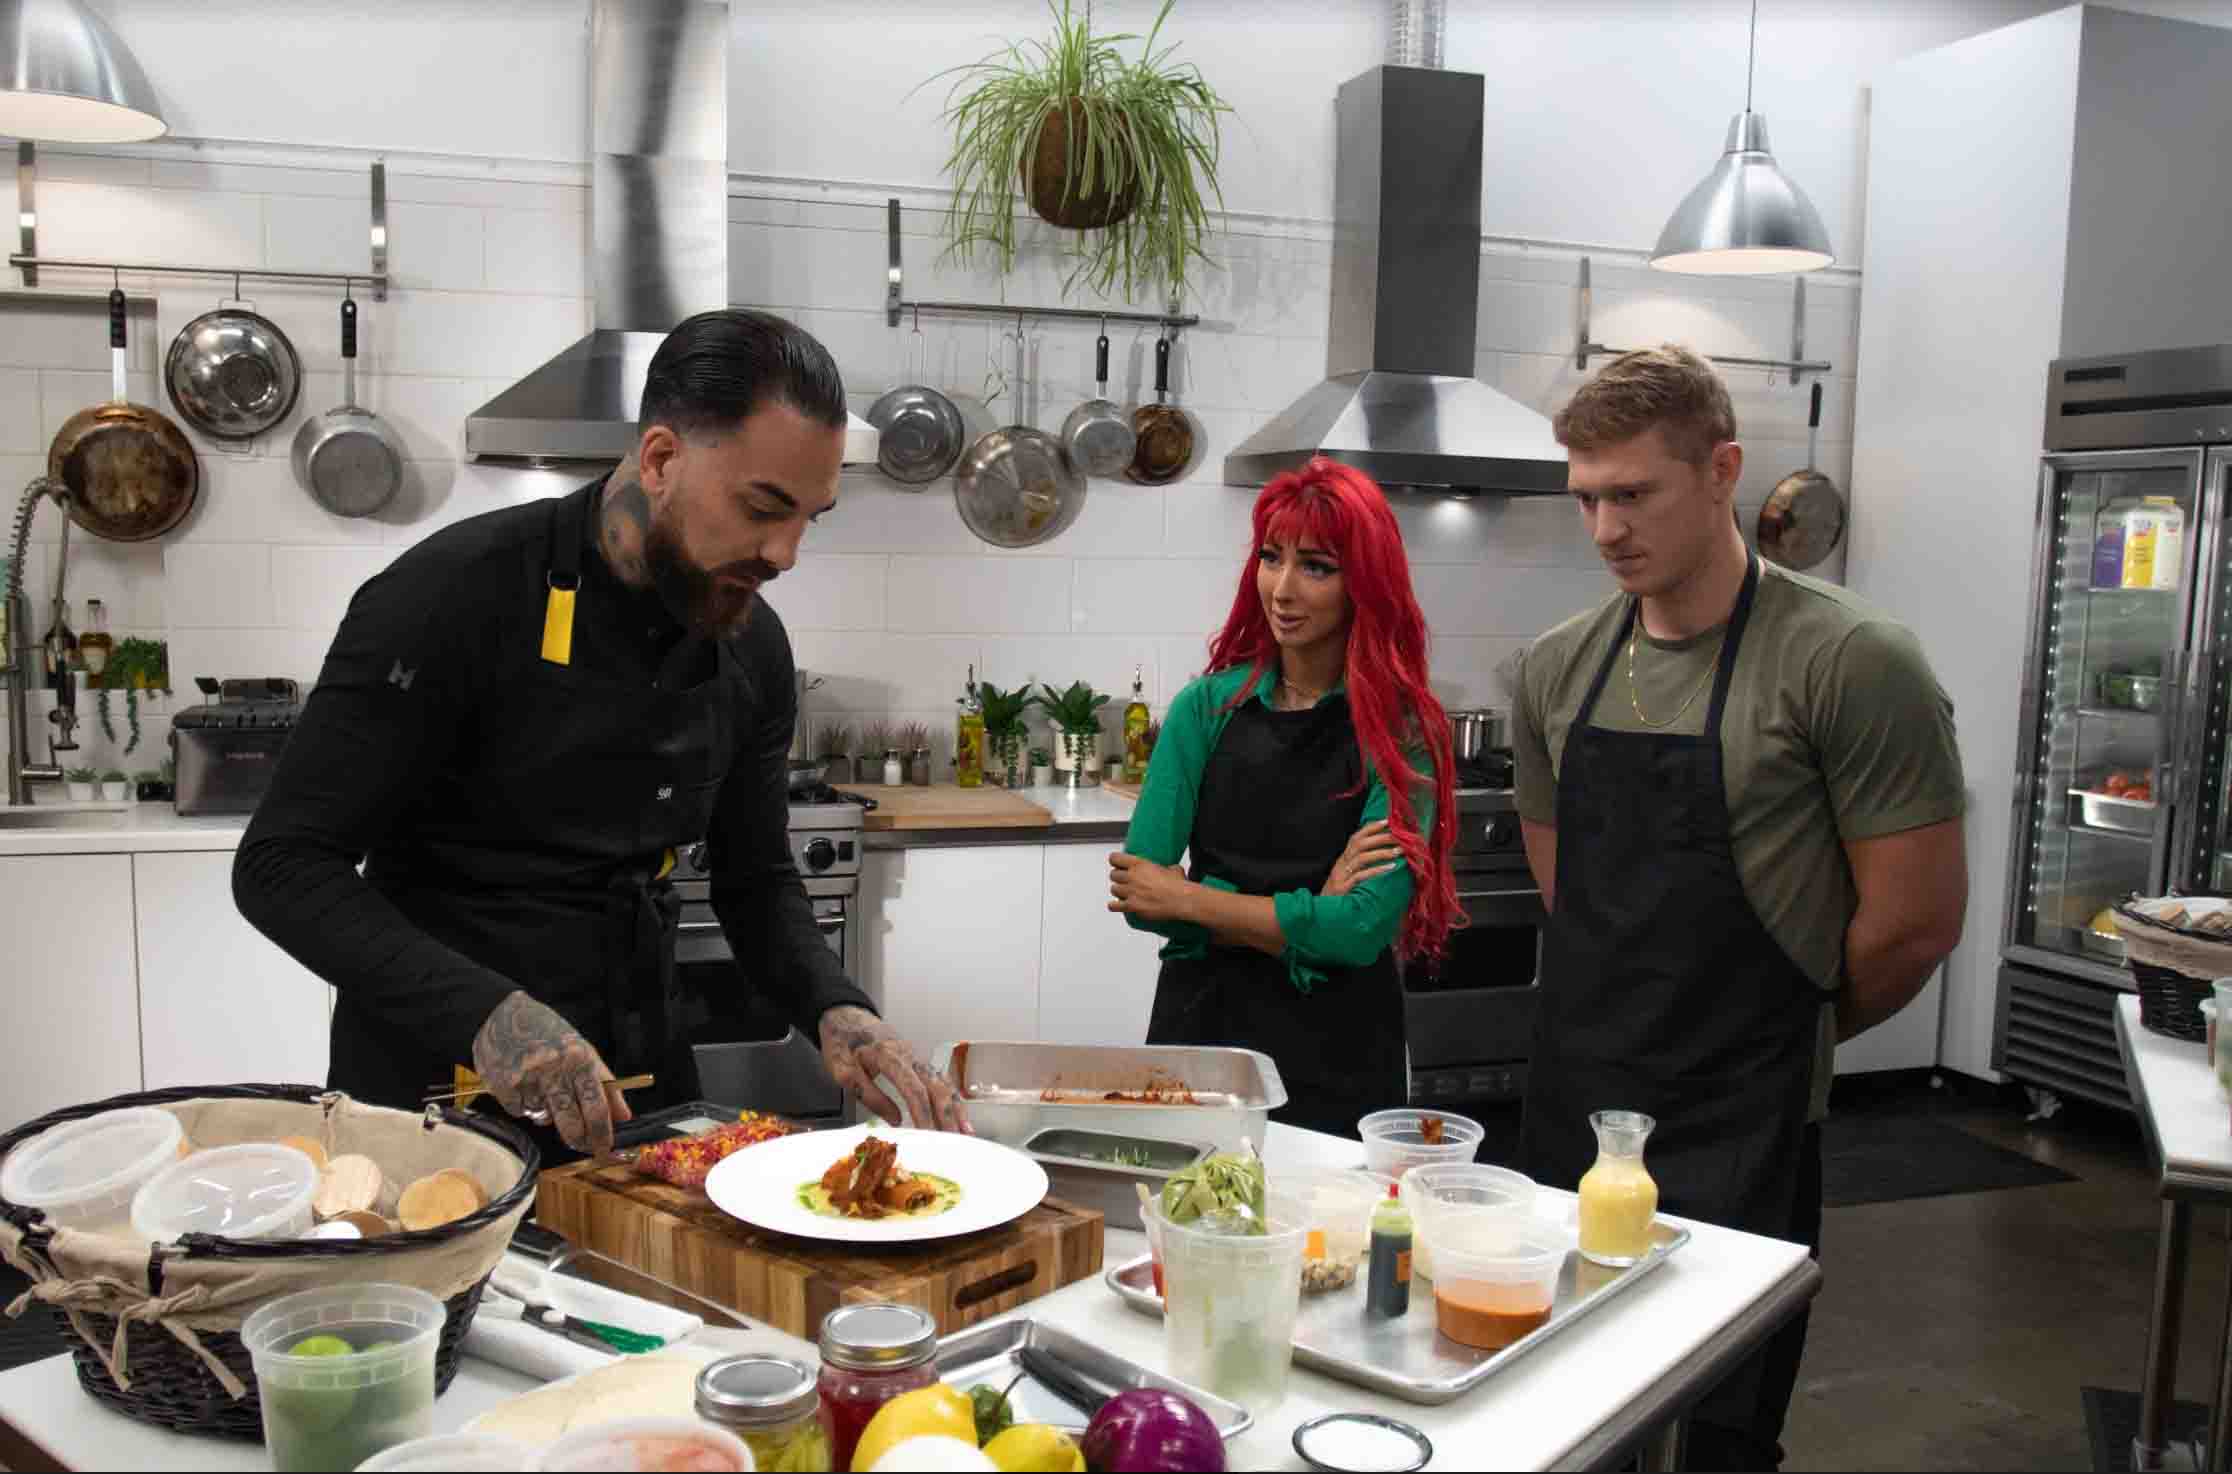 in a kitchen setting a male chef with dark slicked back hair in a black longsleeve shirt and black apron reaching out for a prepared dish to judge in front of two contestants: one woman with long dyed red hair wearing a longsleeve green shirt and black apron and one man with short dirty blonde hair wearing a short sleeve green shirt and black apron